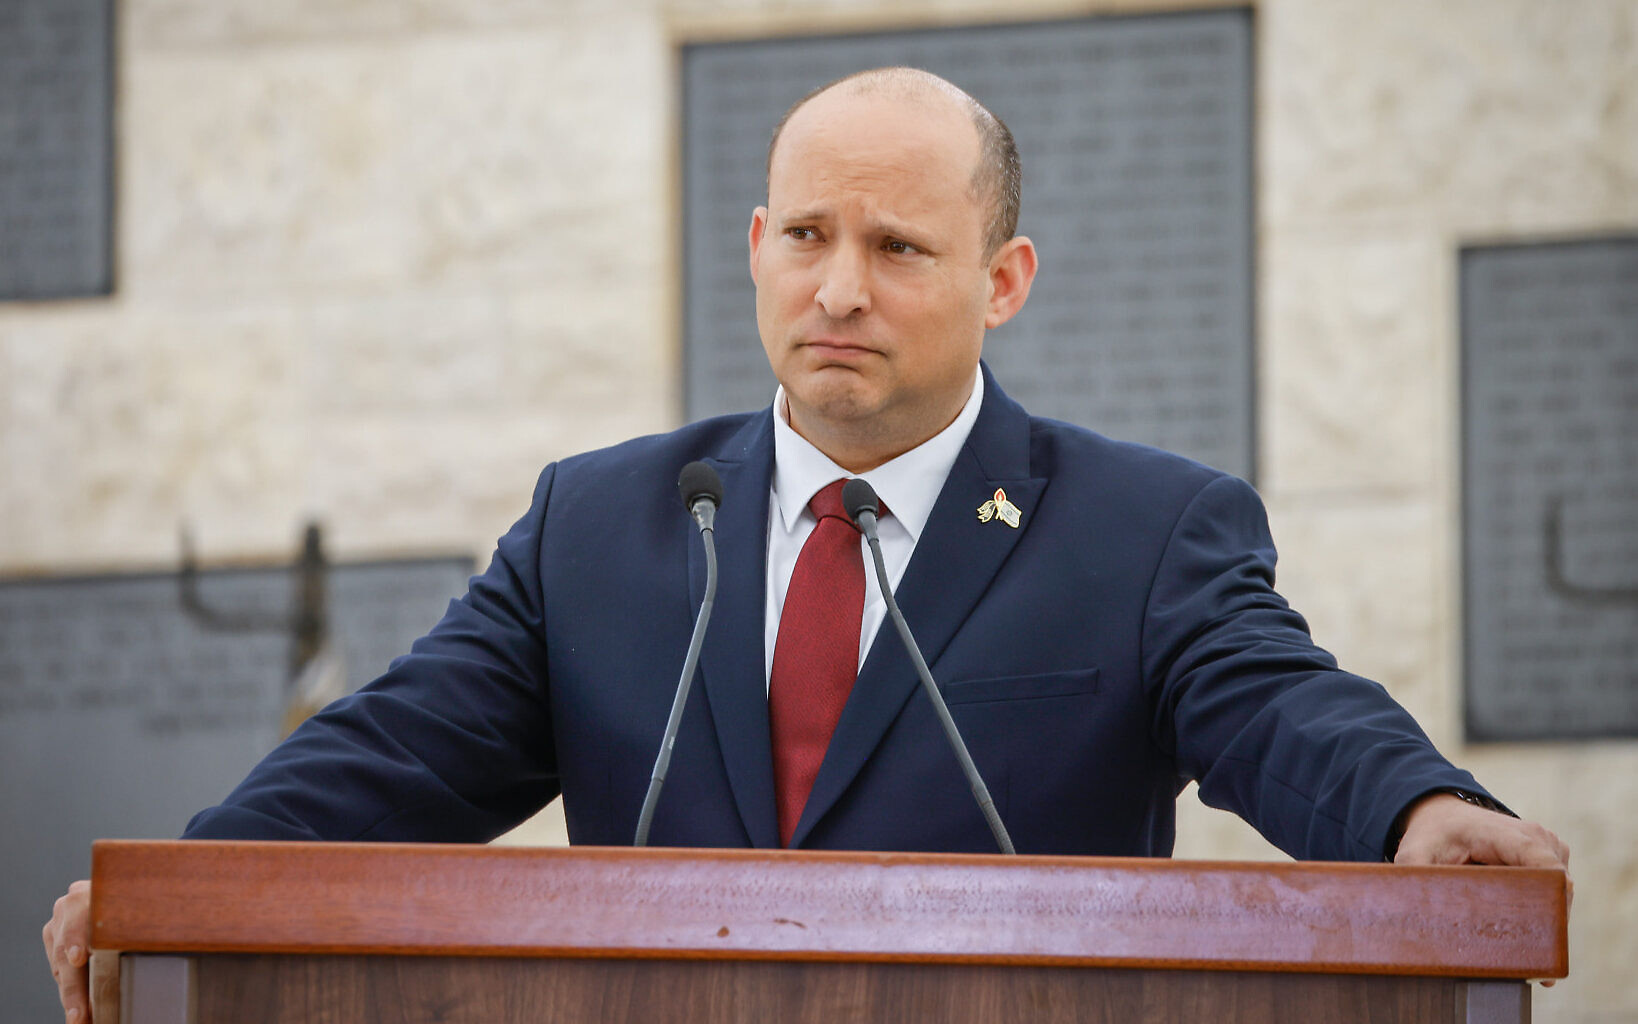 Traitor': Bennett heckled by several bereaved relatives at Memorial Day event | The Times of Israel